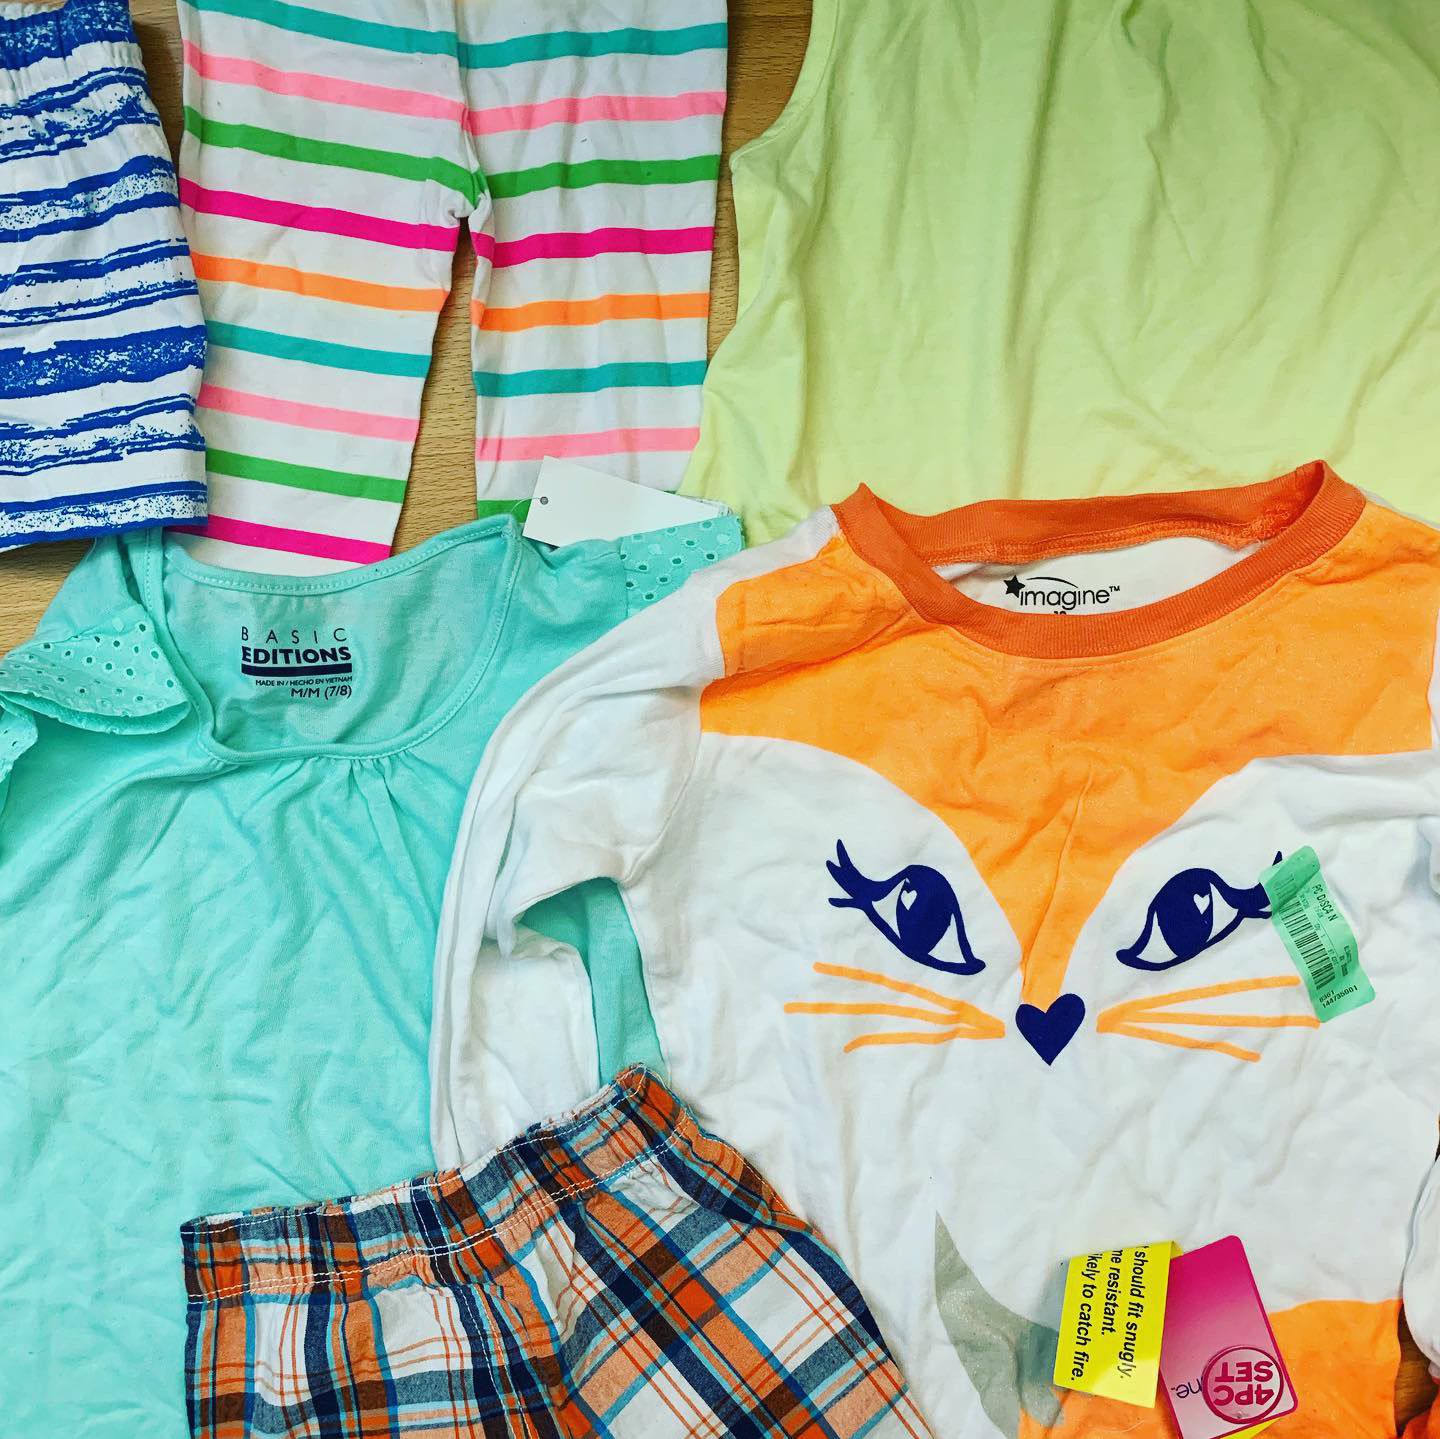 LOT kids clothes New! Up to 80% off retail! With tags perfect condition Children clothes! I can deliver and ship lots and pallets!